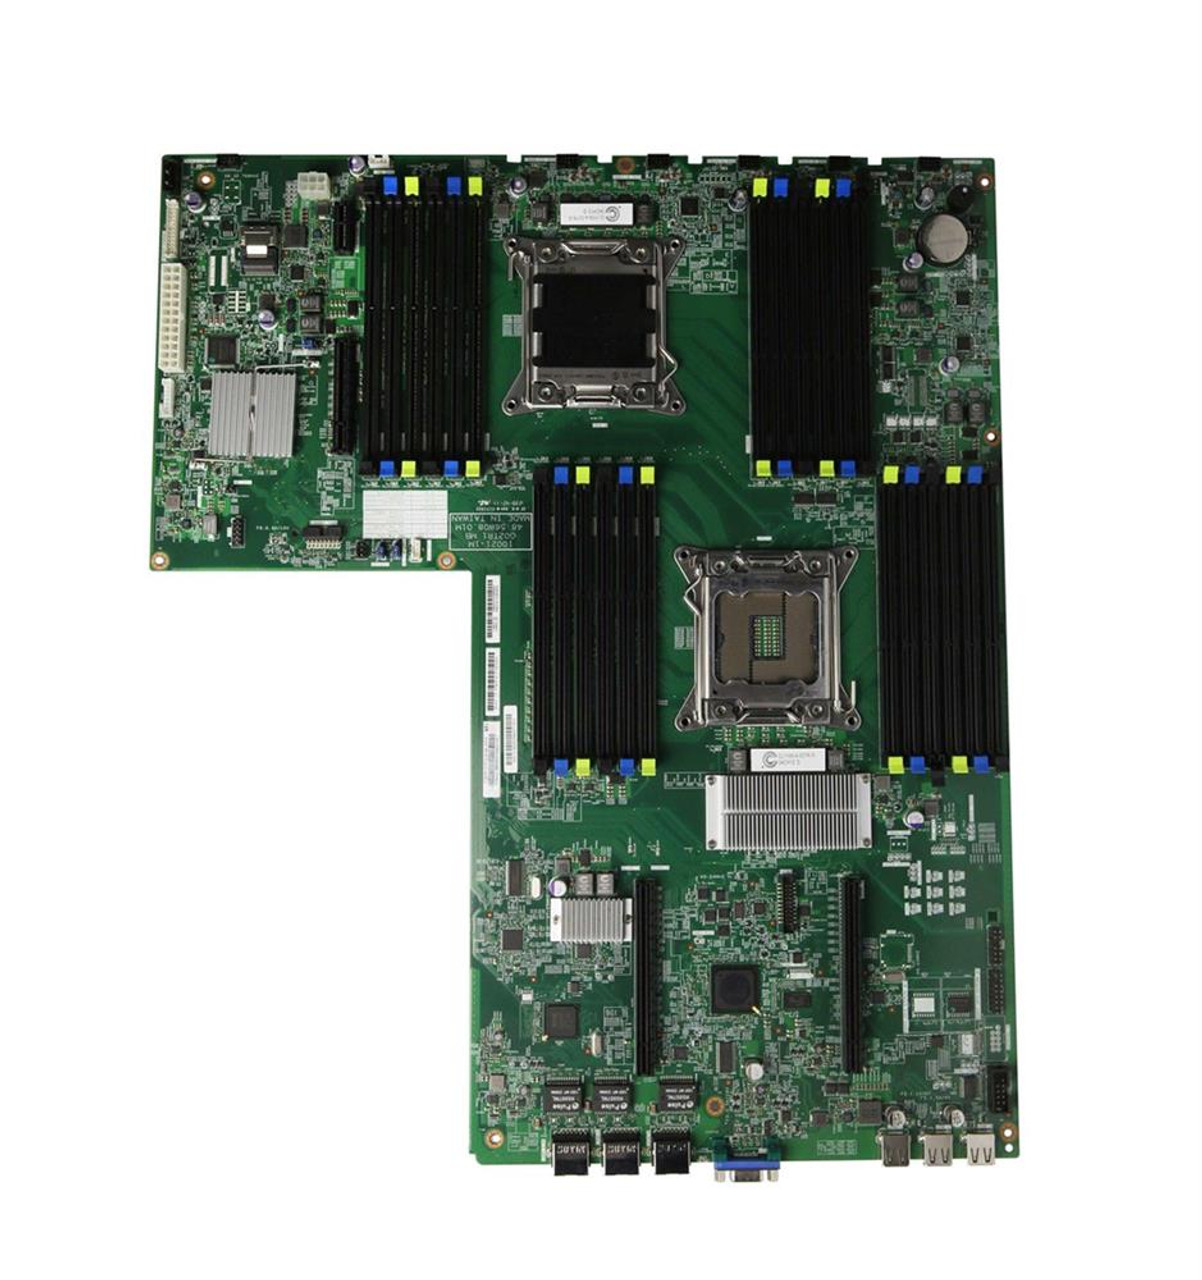 S26361-D3032-A100 Fujitsu System Board (Motherboard) for Primergy RX200 S7 (Refurbished)